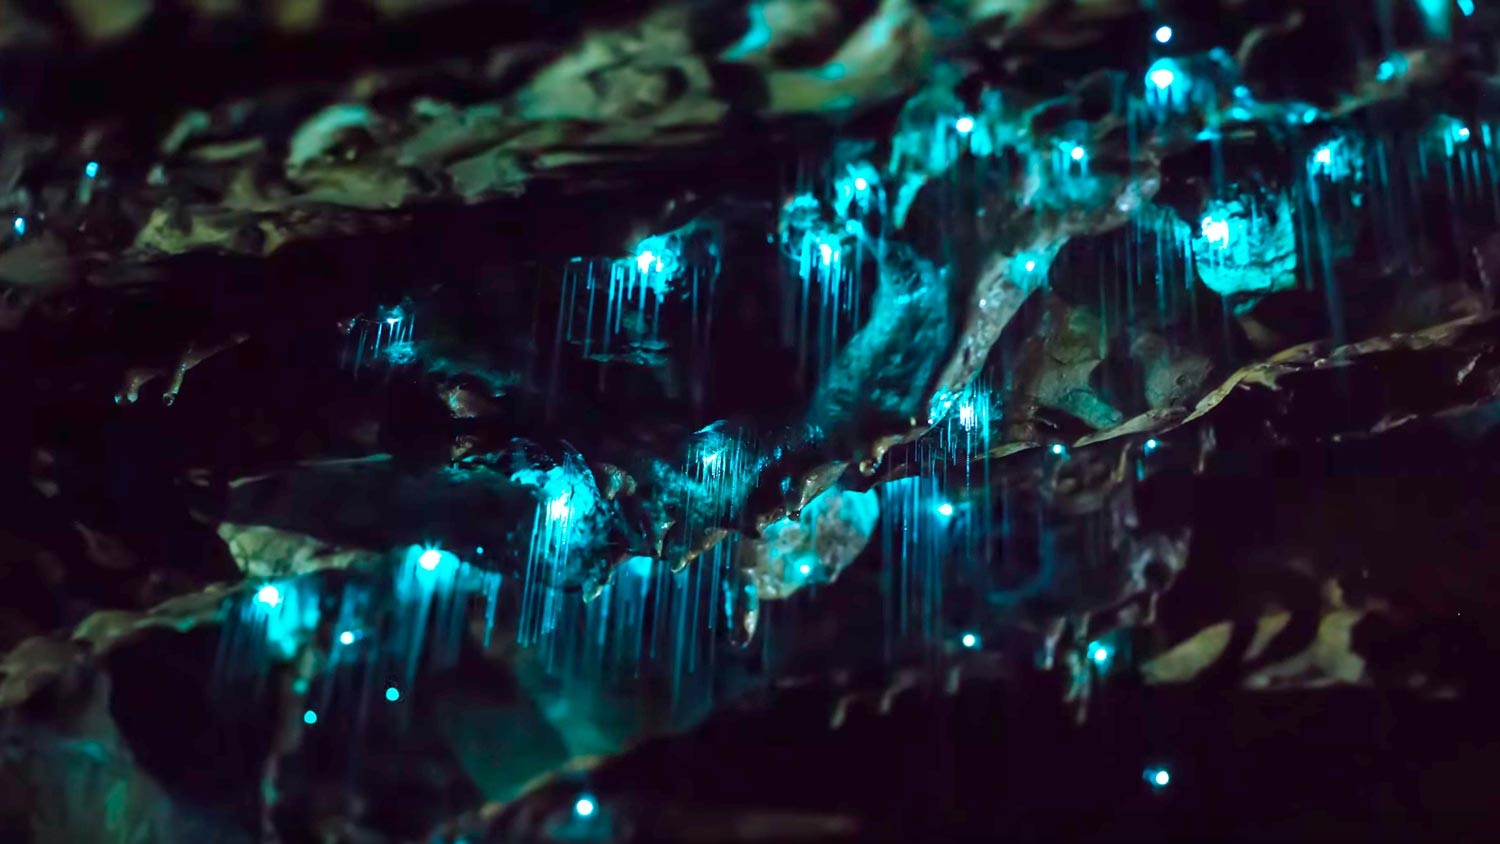 <p>Кадр видео &ldquo;<a href="https://www.youtube.com/watch?v=JC41M7RPSec" target="_blank">Glowworms in Motion - A Time-lapse of NZ's Glowworm Caves in 4K</a>&rdquo;. Скриншот &copy; L!FE</p>